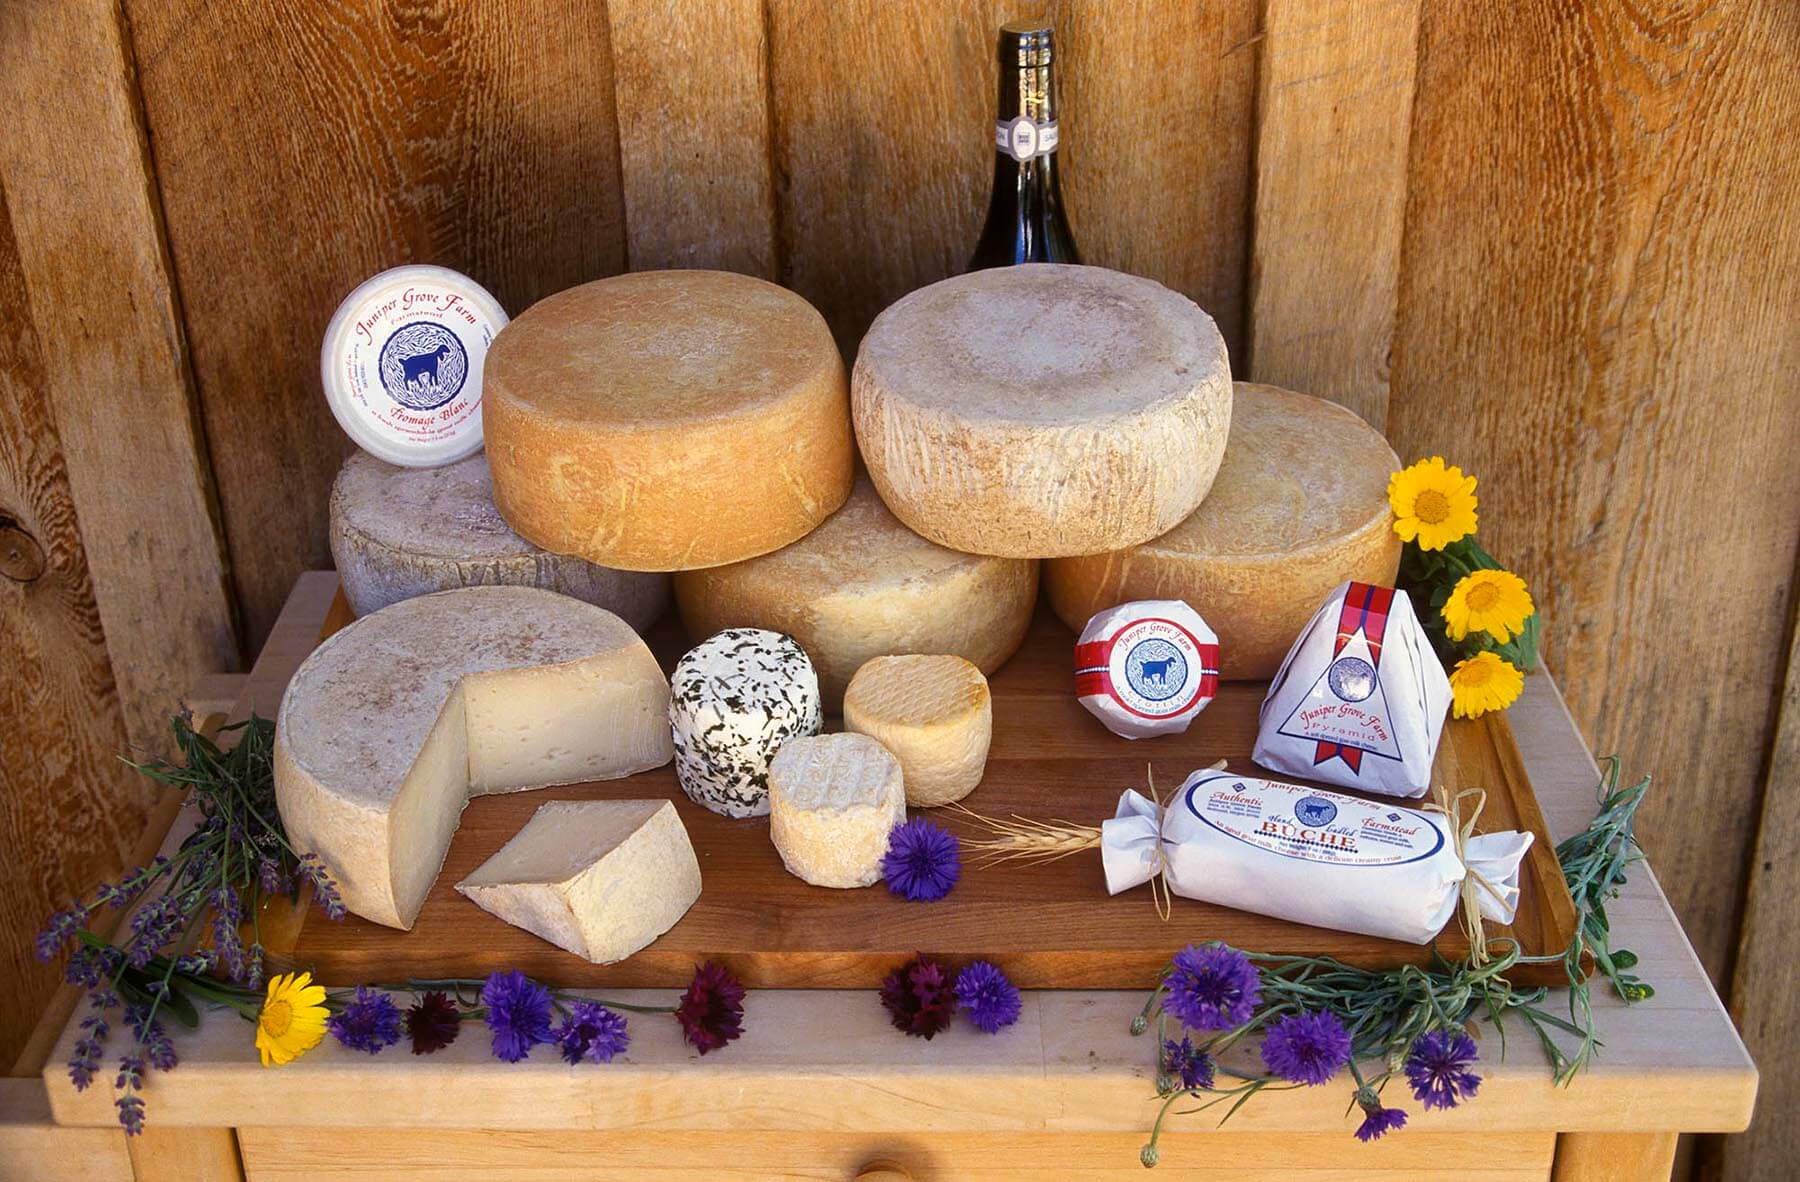 A display of the hand made GOAT CHEESES produced at JUNIPER GROVE FARM in REDMOND OREGON. - Photography by Craig Lovell